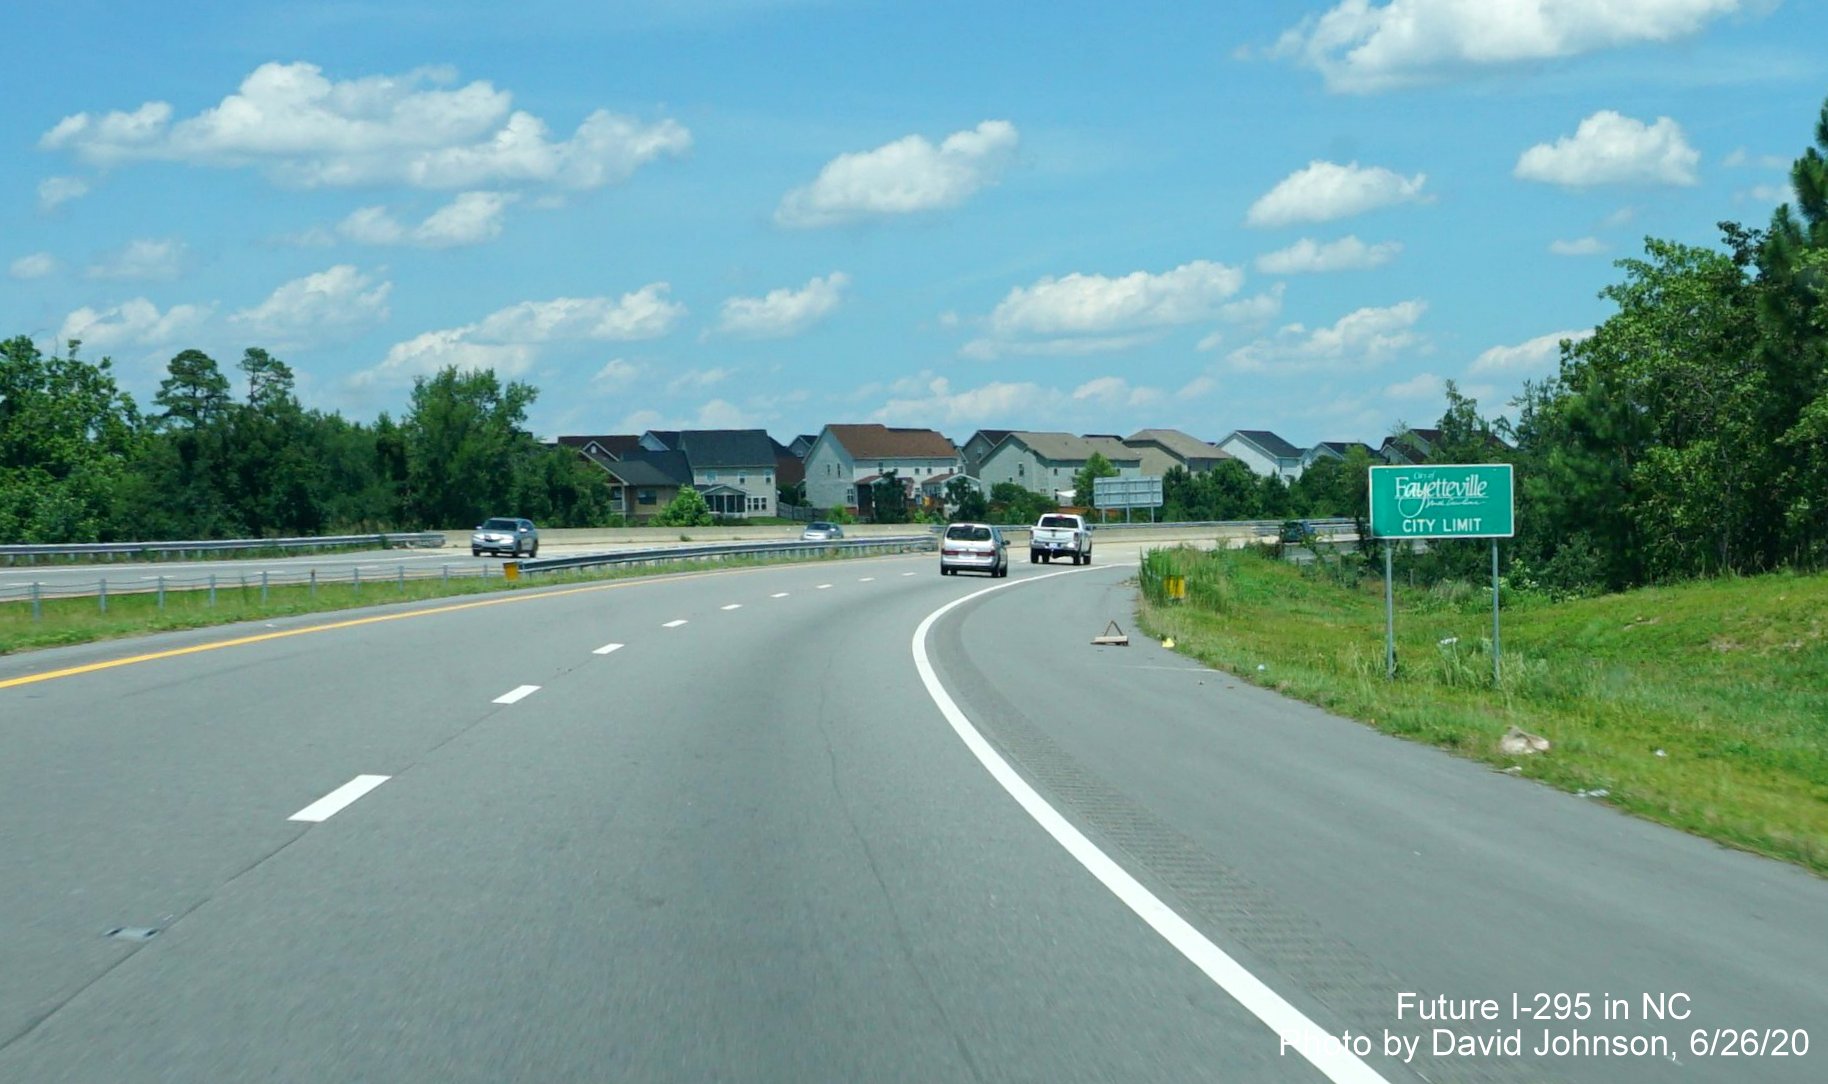 Image of the guide sign for Fayetteville City Limit on I-295 North in Fayetteville, by David Johnson June 2020